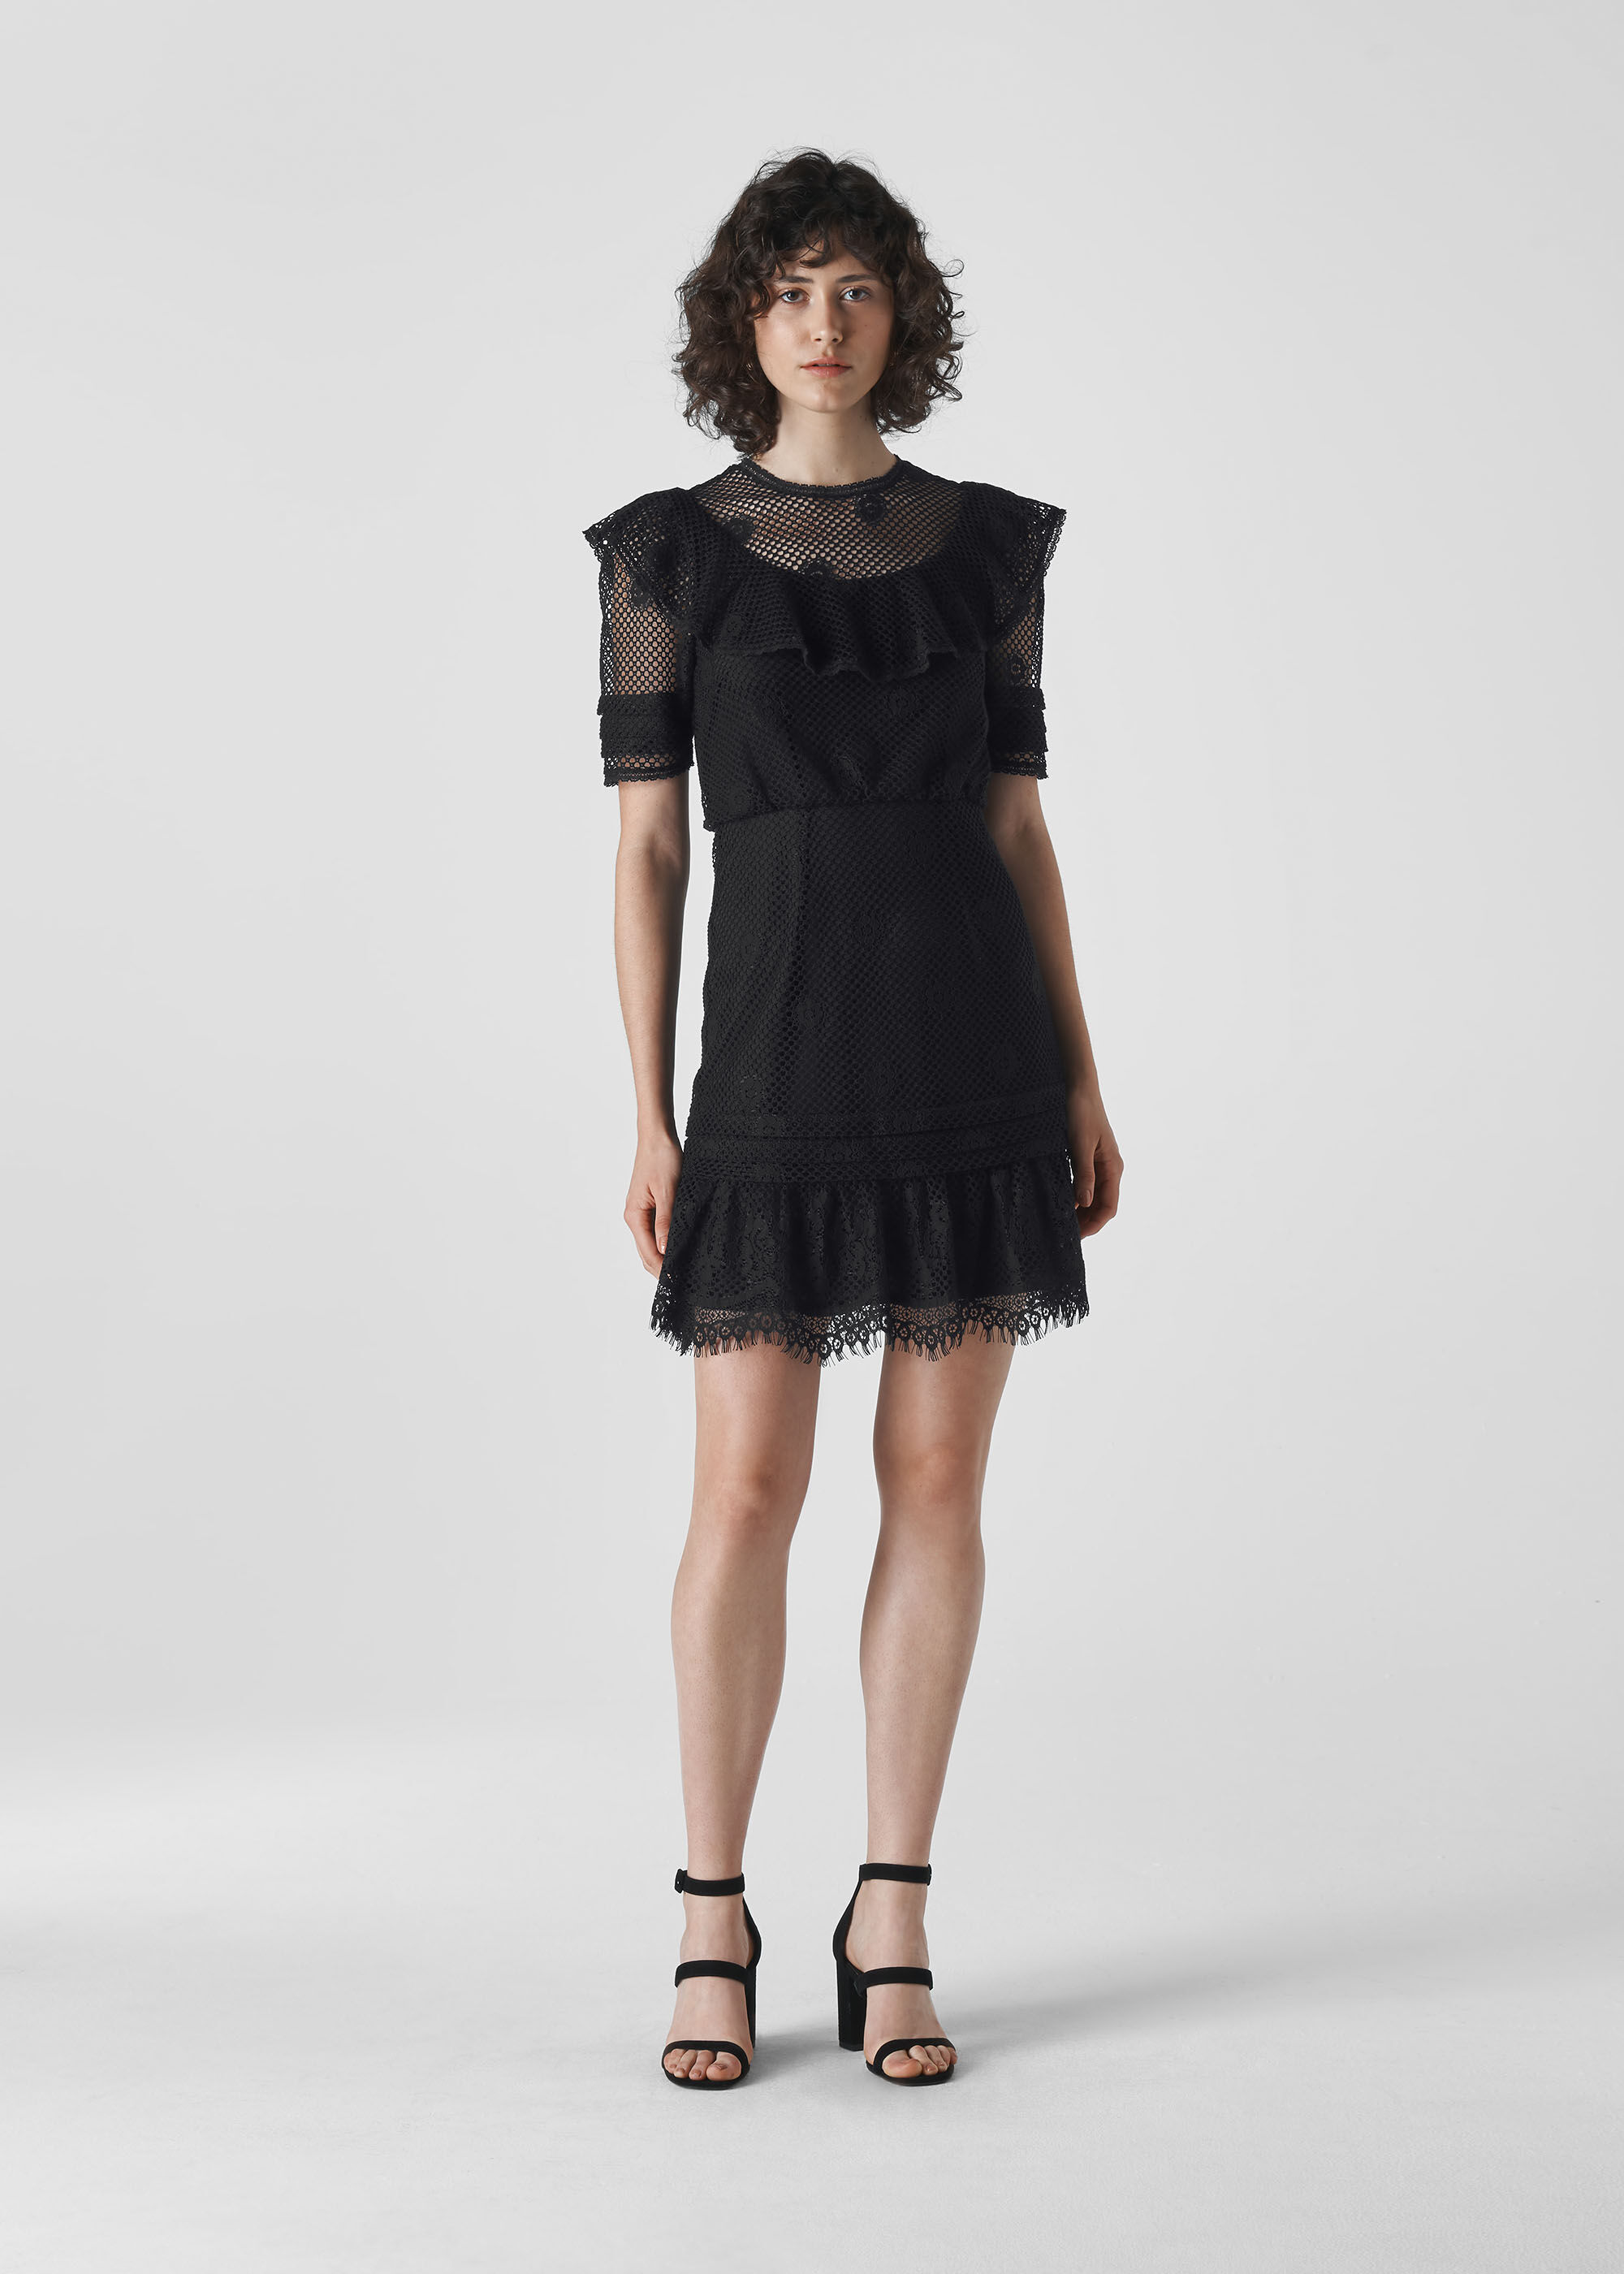 whistles lace dress